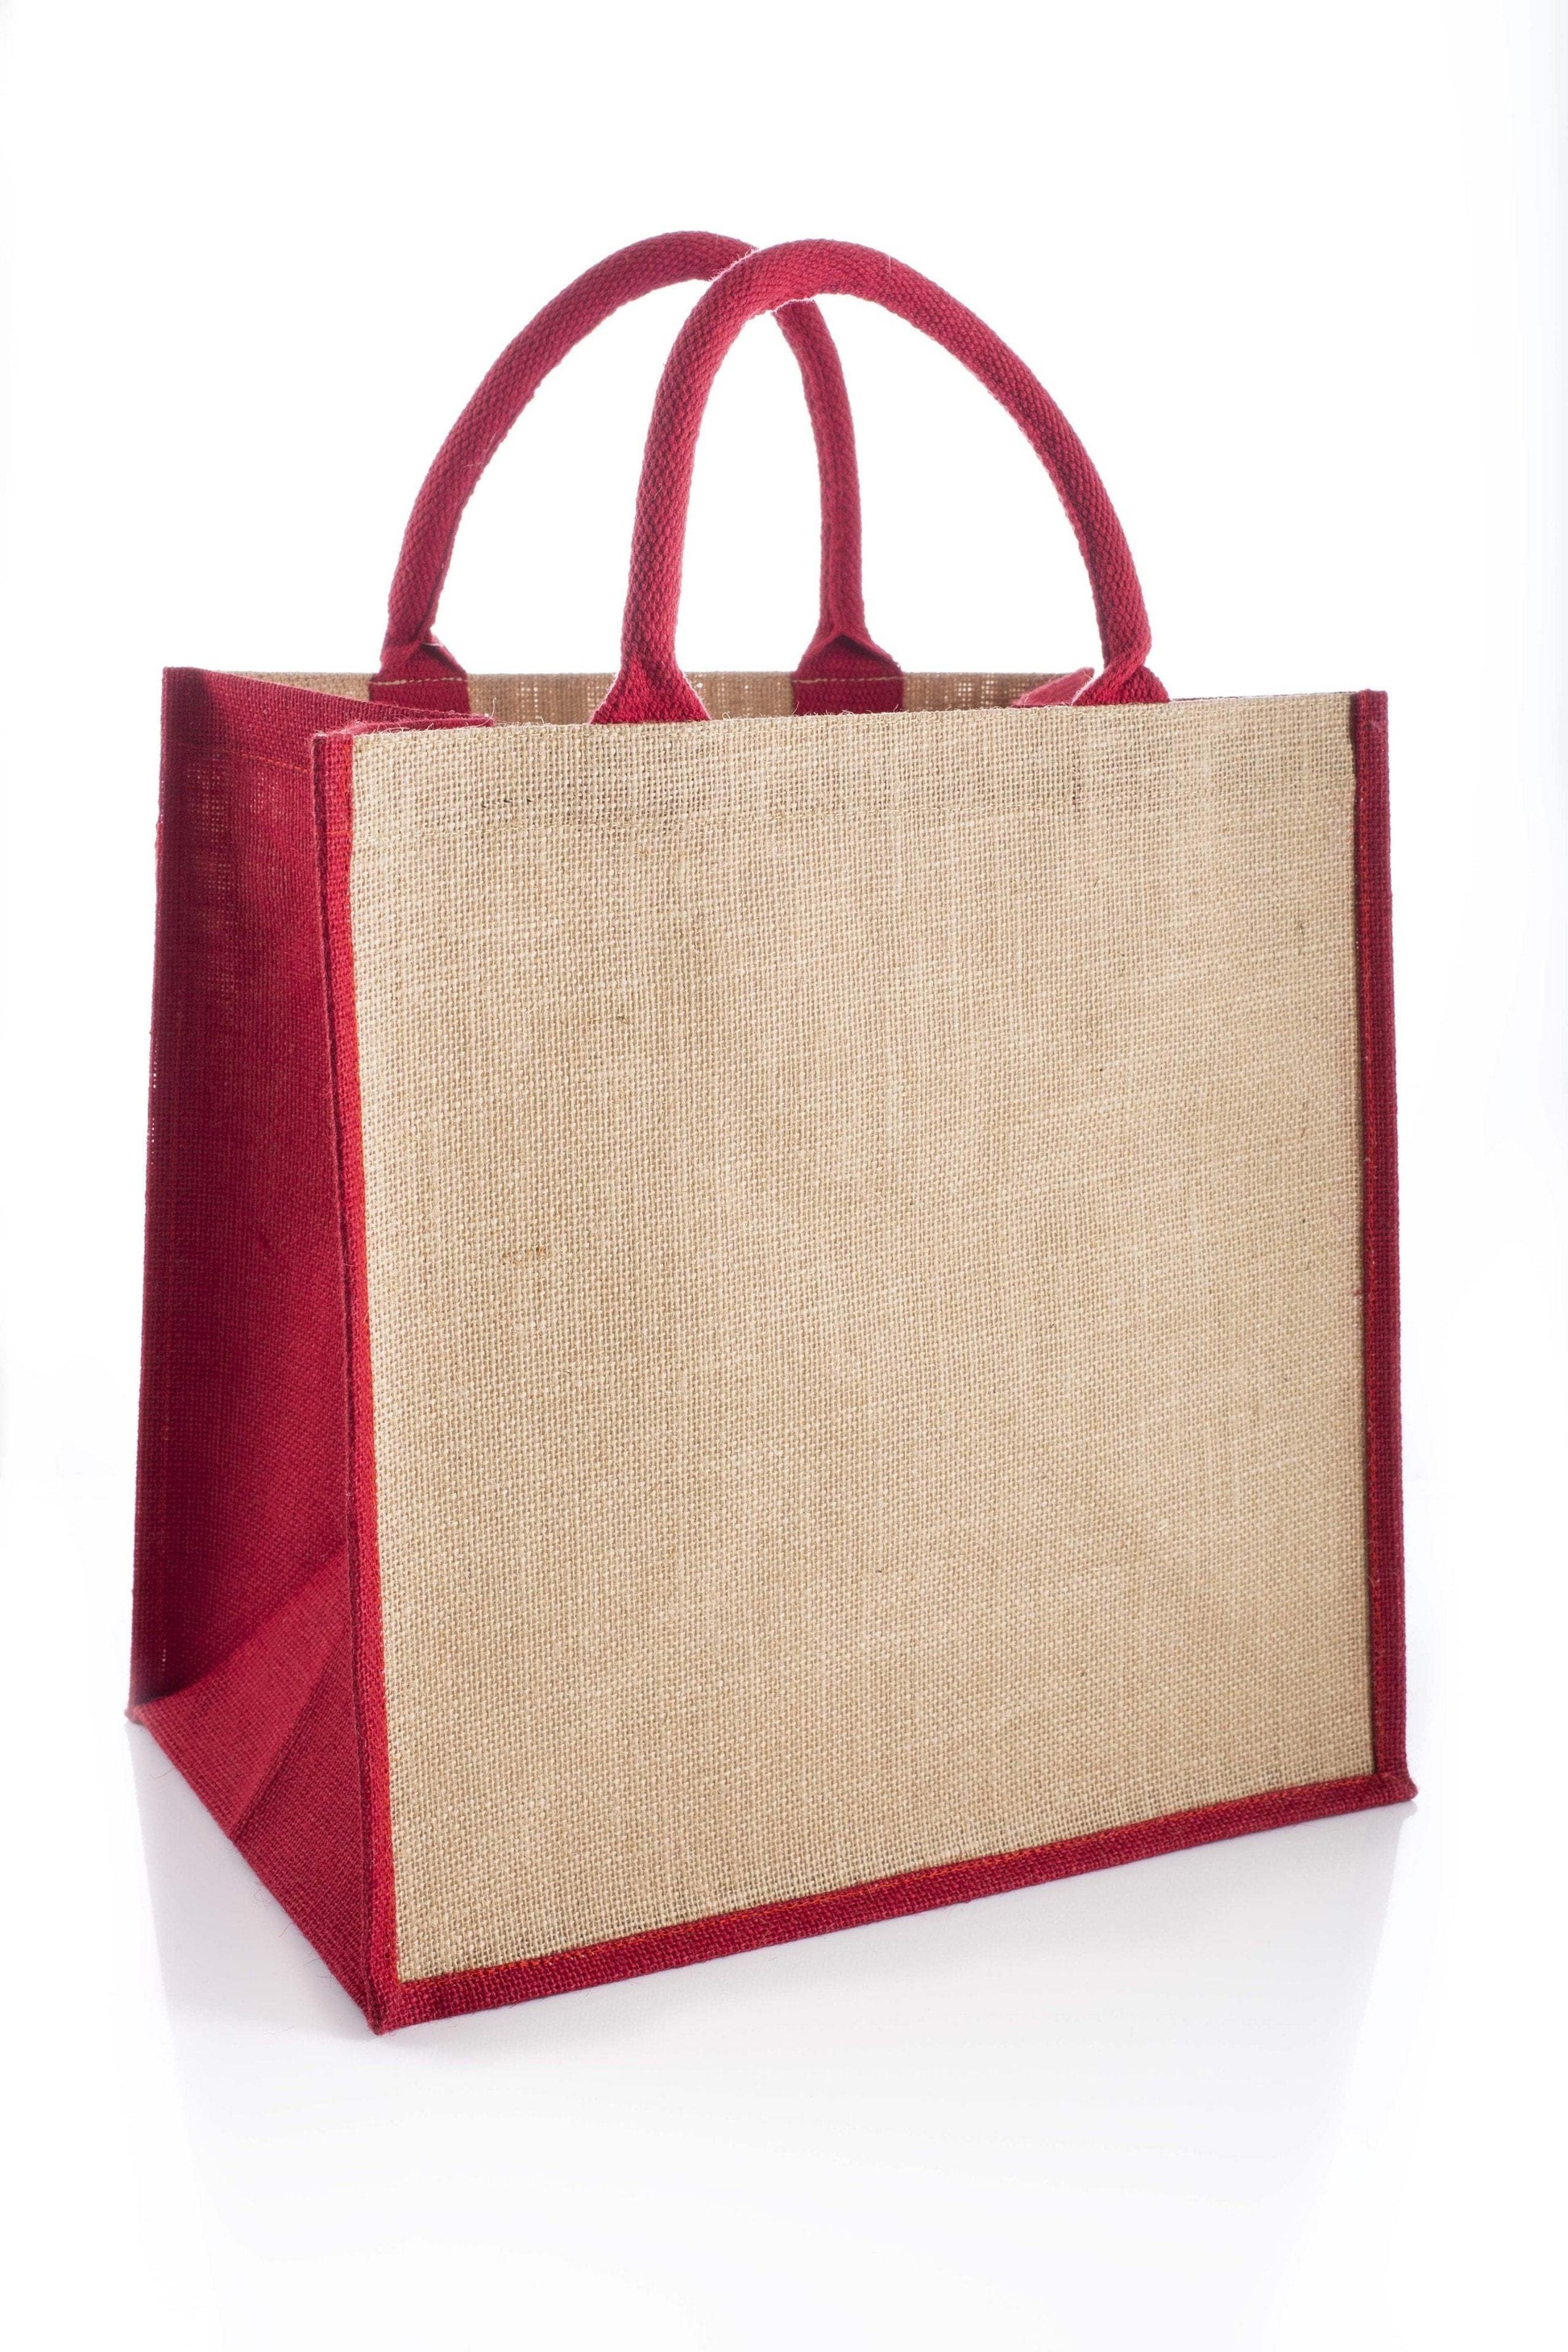 Brecon Jute Bag - Promotions Only Group Limited